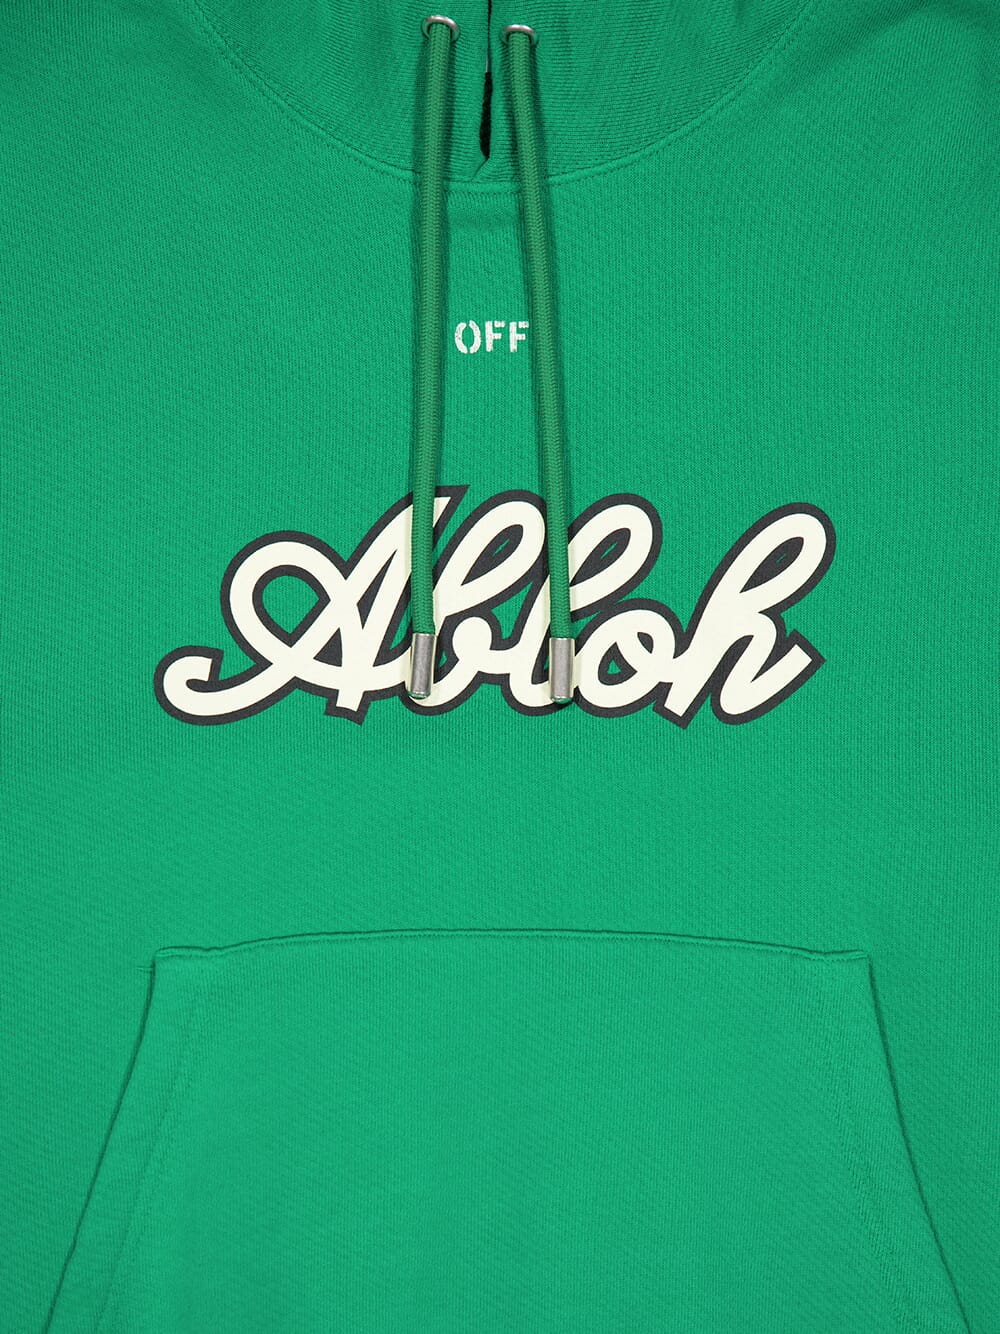 Off-WhiteVibrant Green Cotton Hoodie at Fashion Clinic